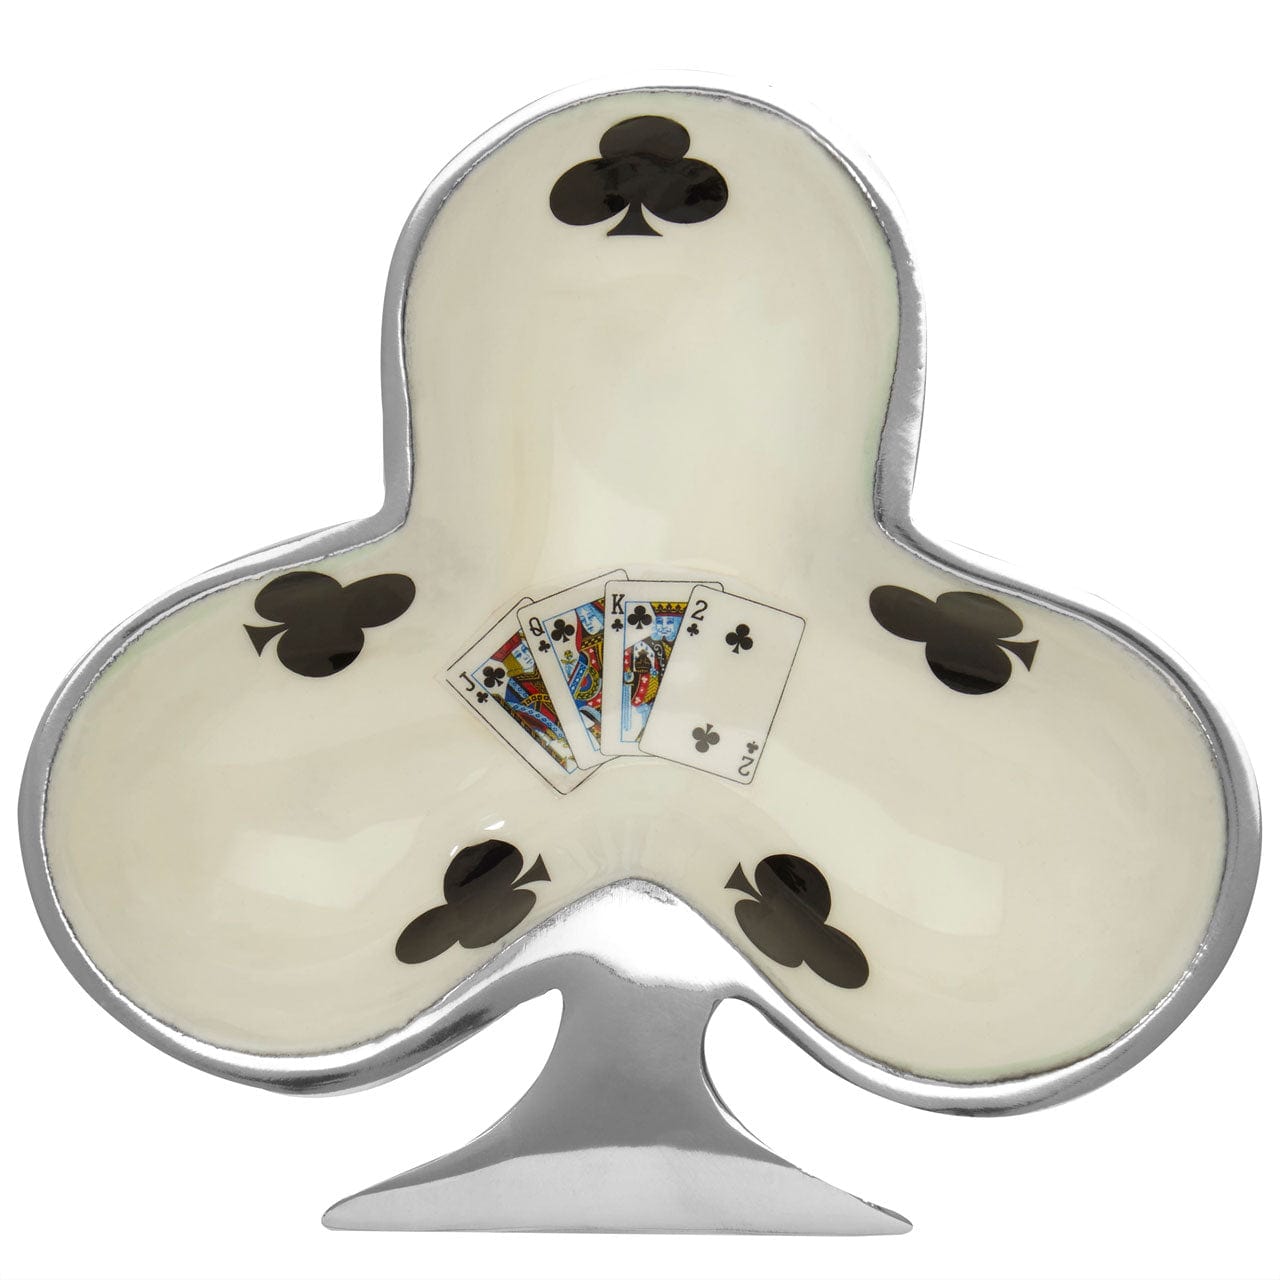 Hamilton Interiors Accessories Set Of 4 Playing Cards Design Bowls House of Isabella UK